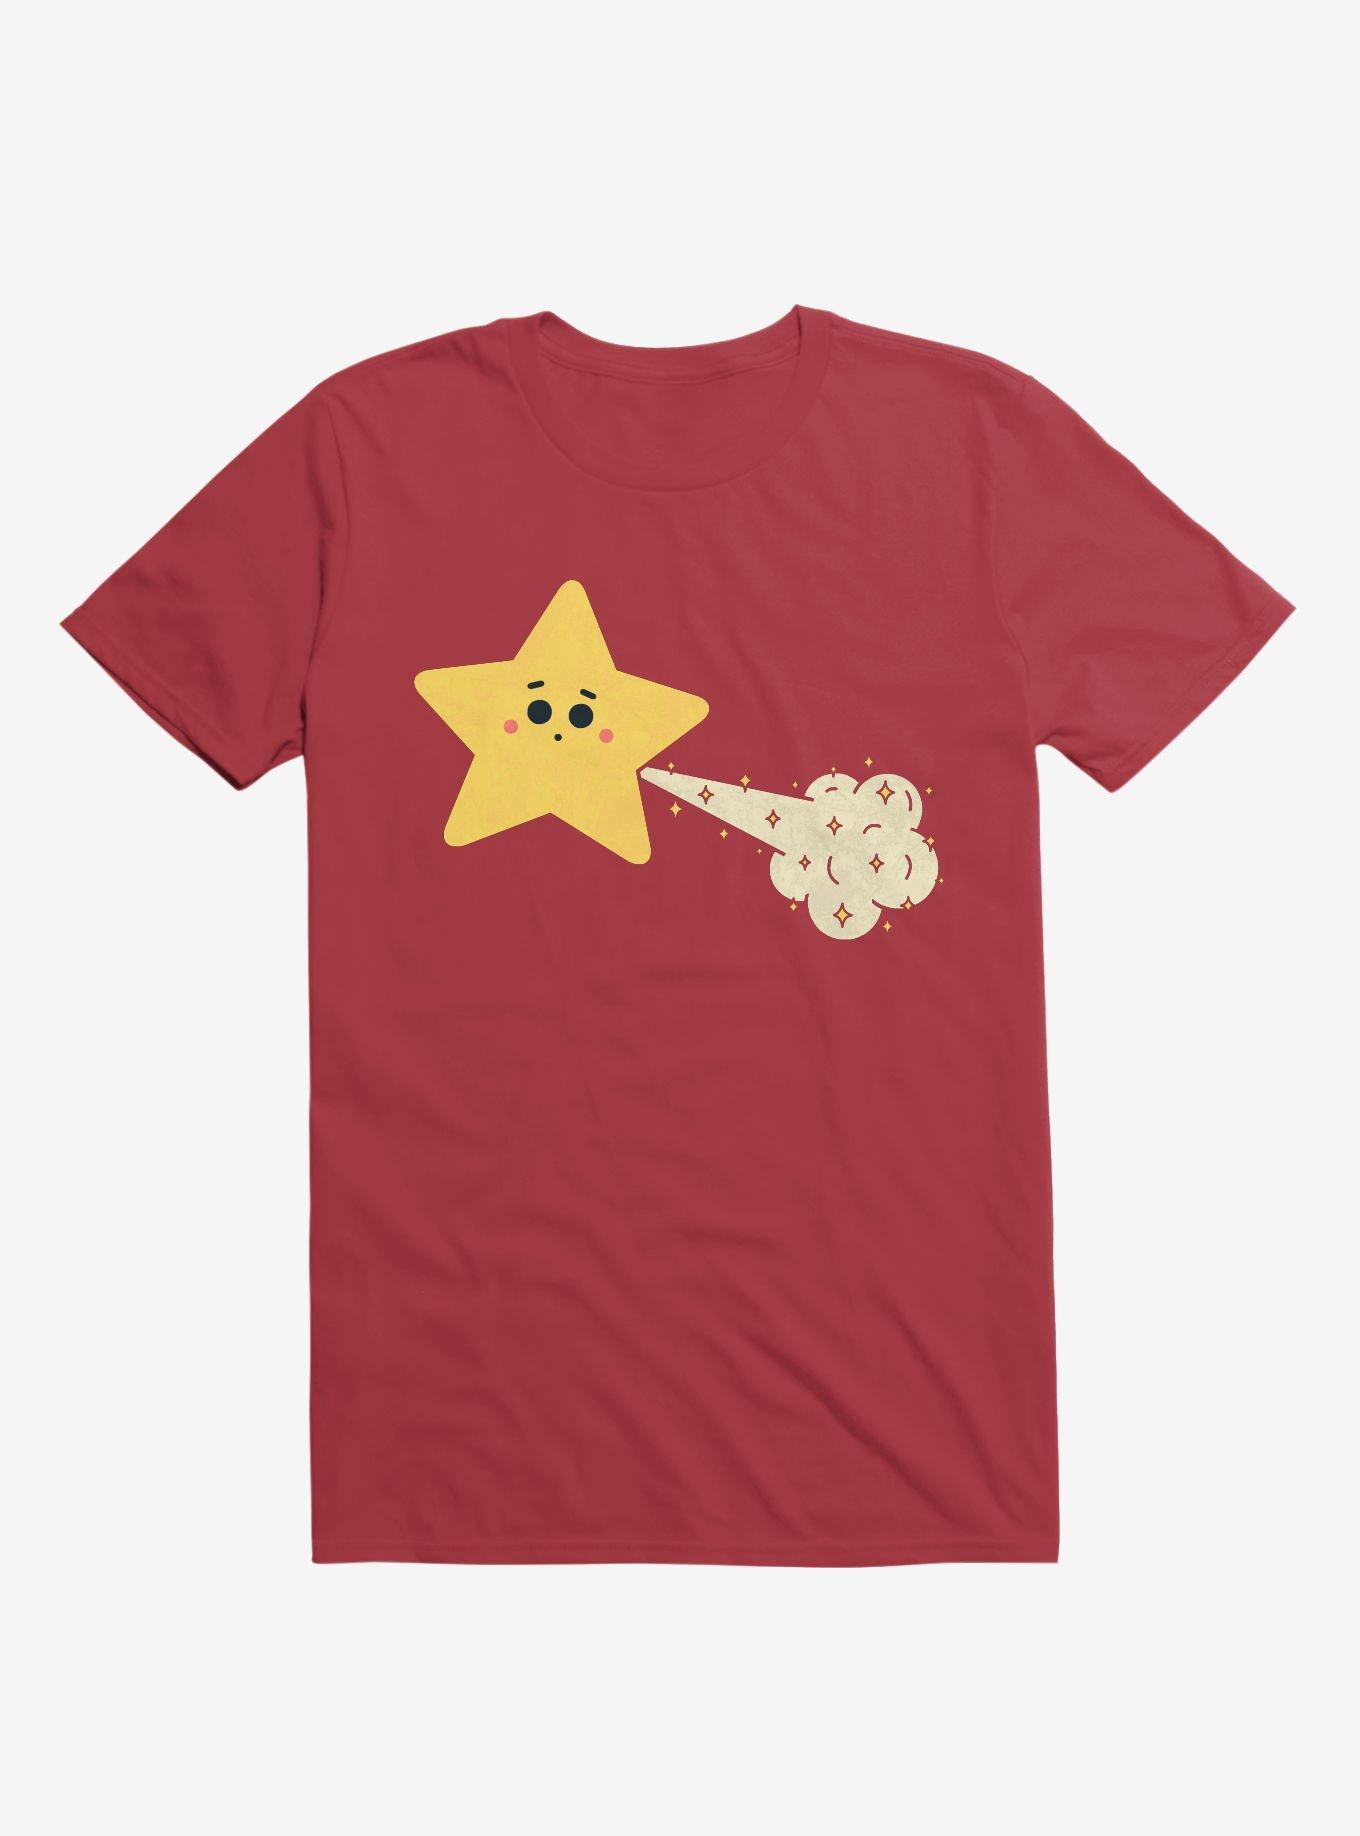 Sparkle Tooting Star Red T-Shirt, RED, hi-res